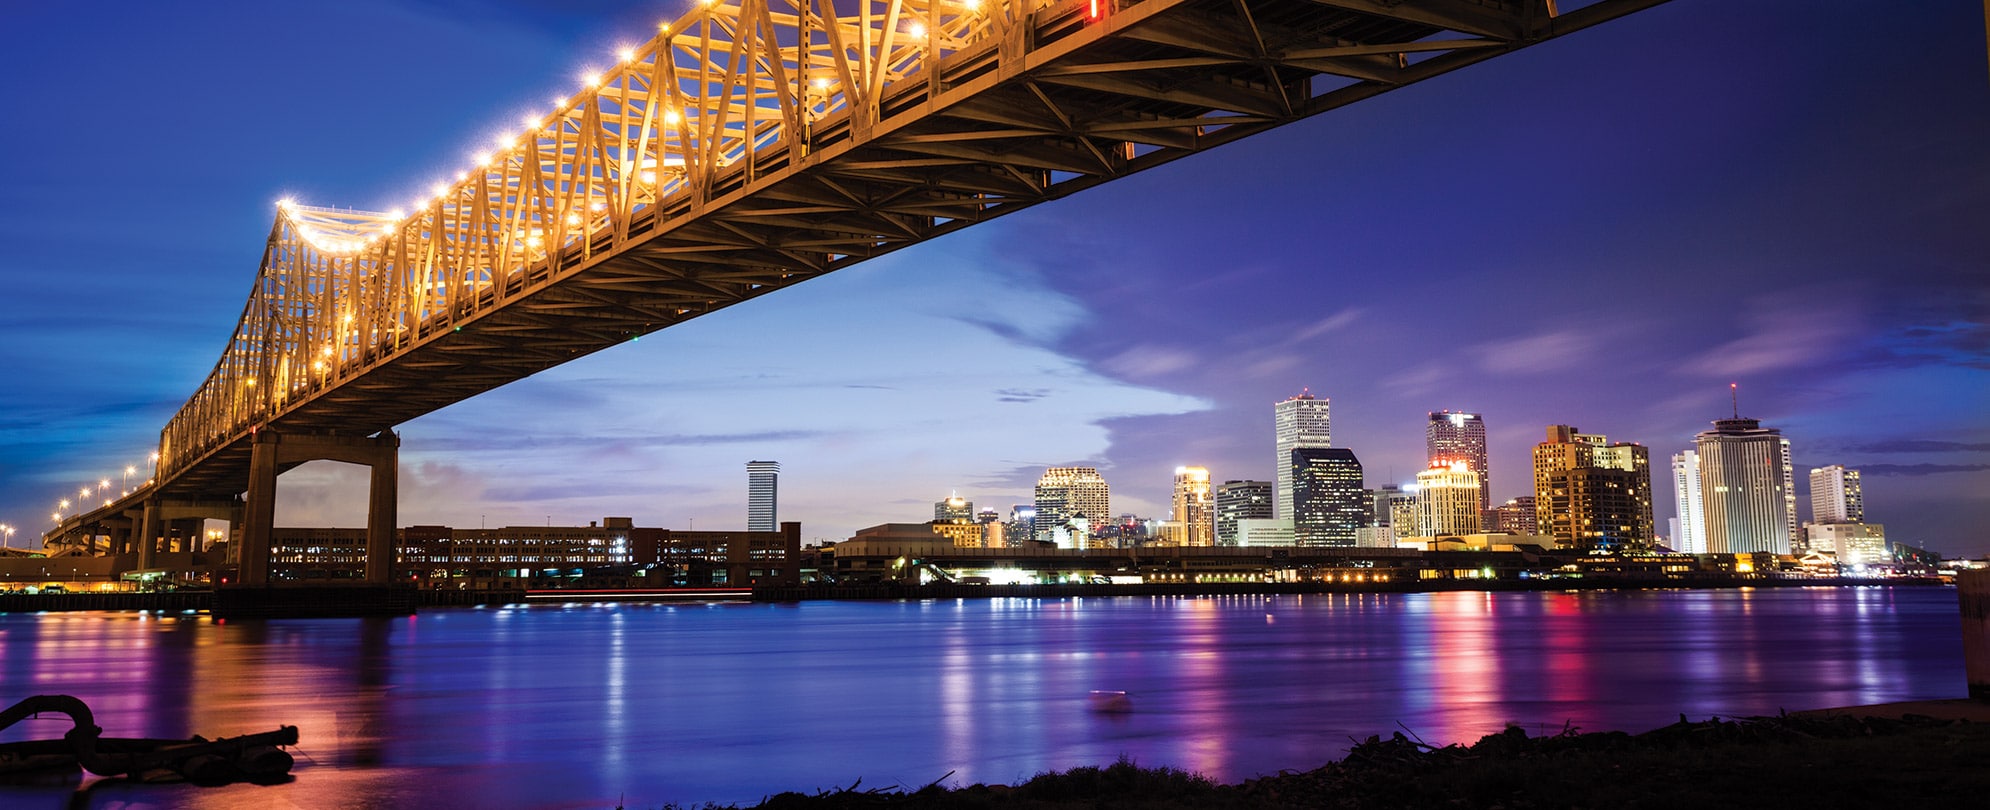 A river and bridge in New Orleans at night, the city skyline lit up in the distance.